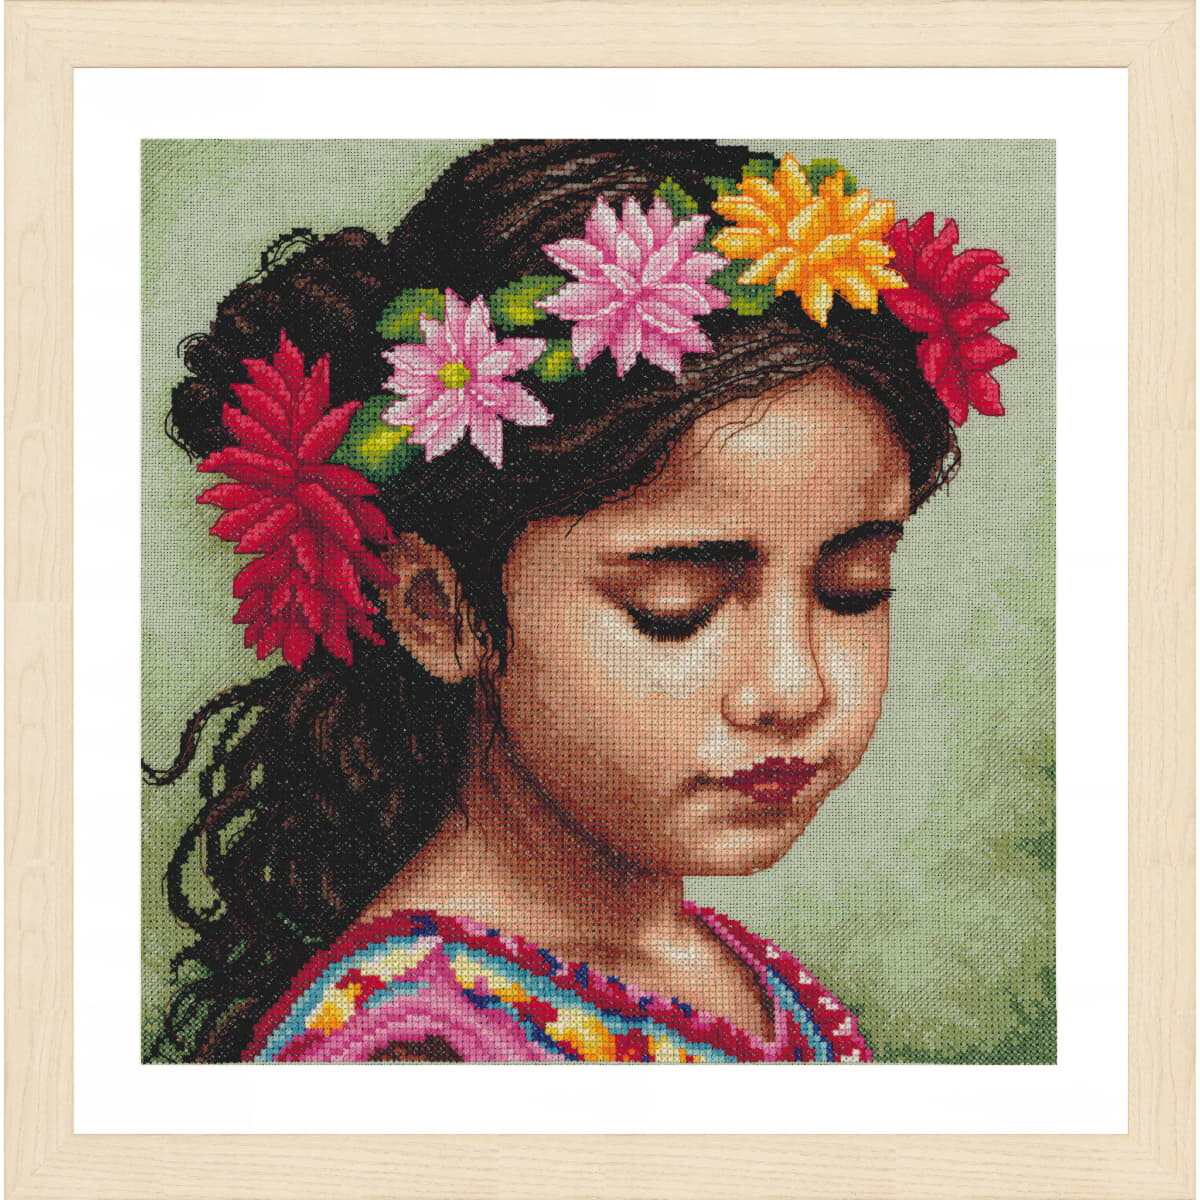 A Lanarte embroidery pack artwork shows a young girl with...